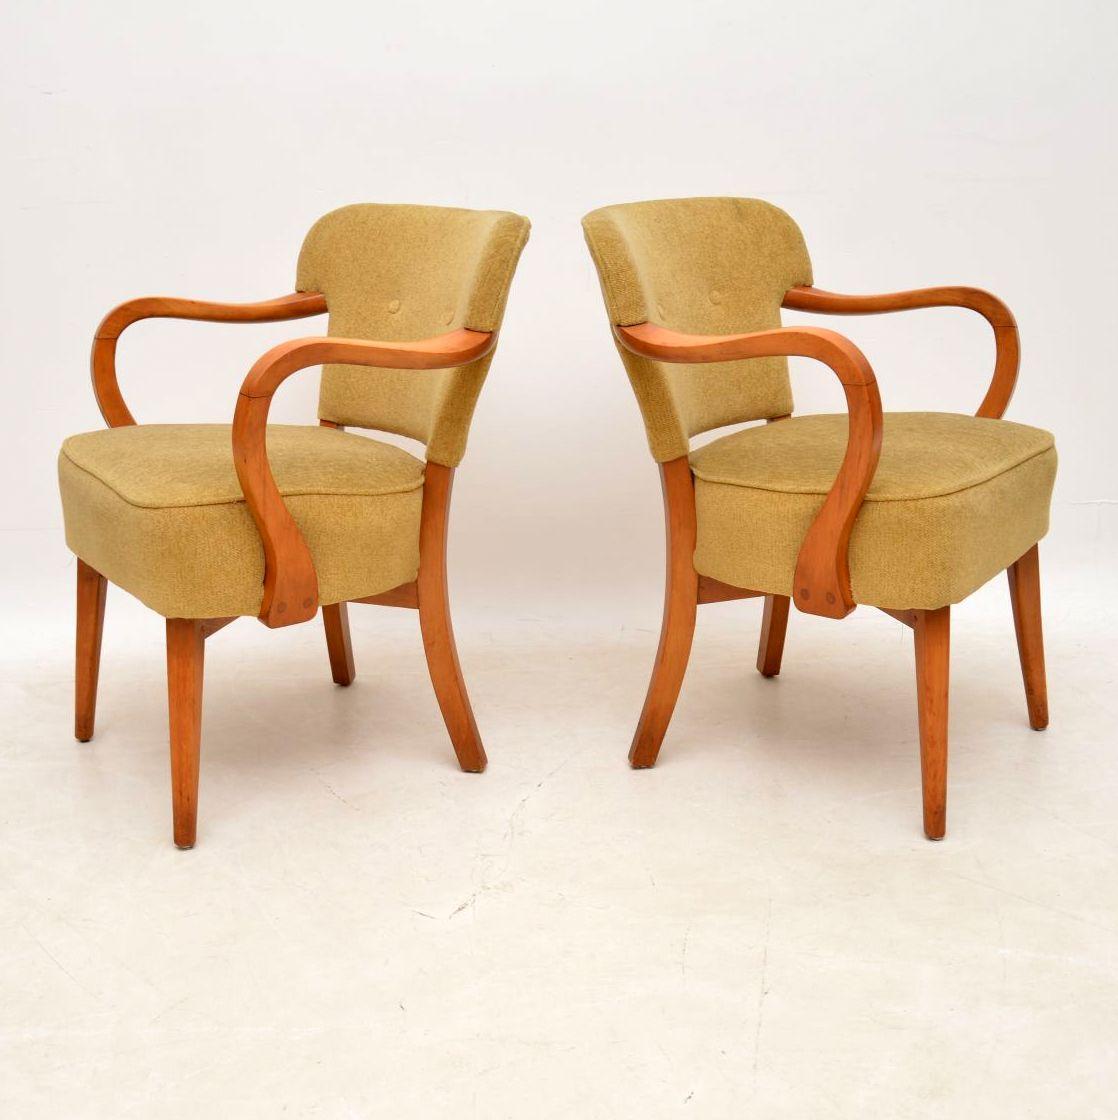 A beautifully designed pair of vintage cocktail chairs, these date from the 1950’s. They are in superb condition for their age, having been recently re-upholstered by the previous owner. The solid wood frames are clean, sturdy and sound, with only